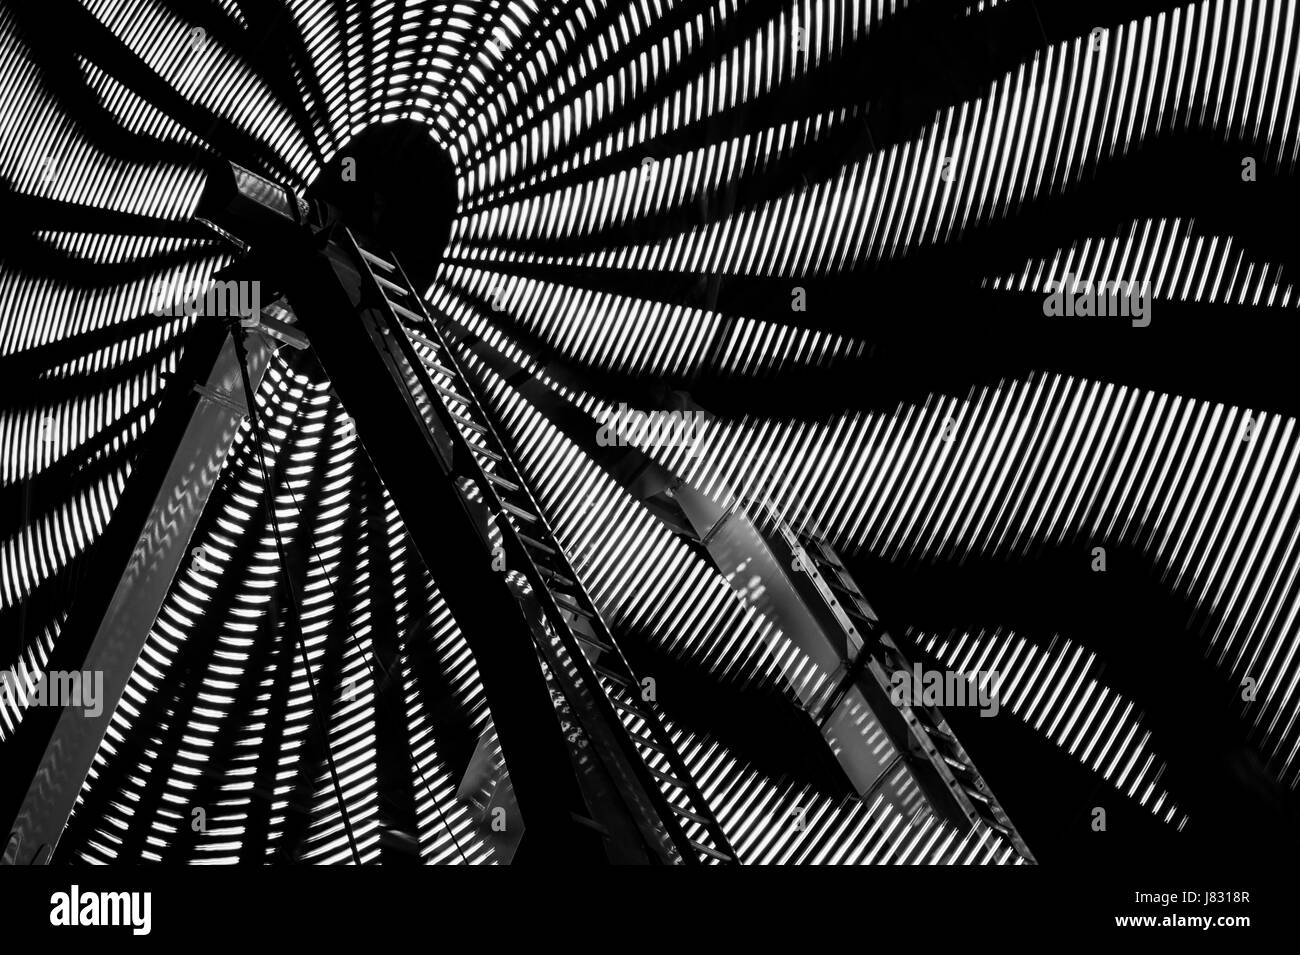 Ferris wheel in motion with  abstract patterns Stock Photo